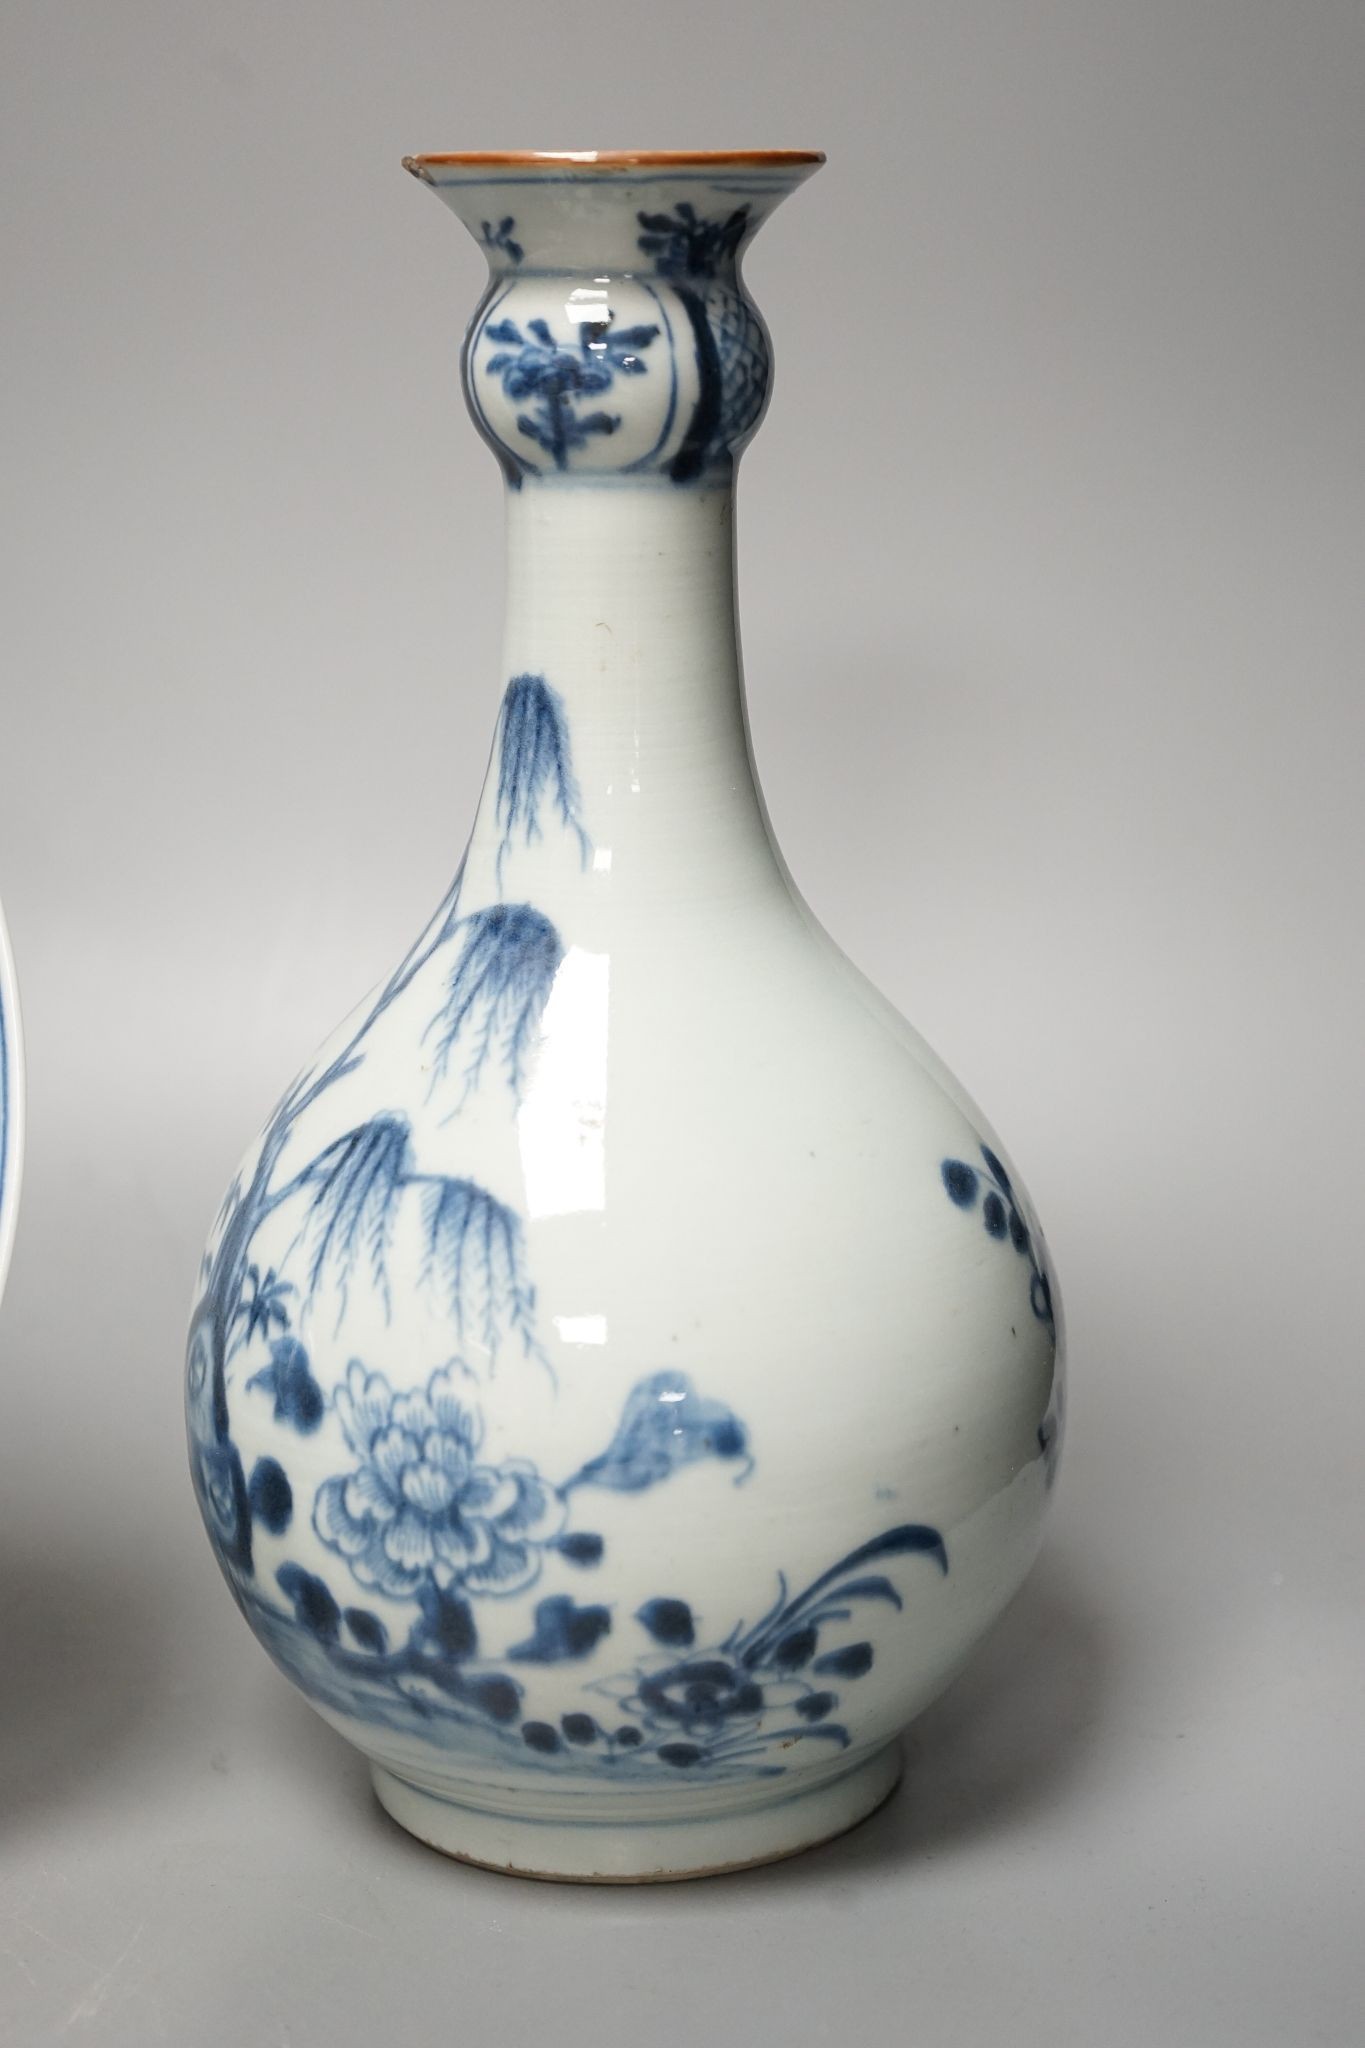 An 18th century Chinese blue and white bottle vase and two 19th century blue and white plates, diameter of largest plate - 25cm